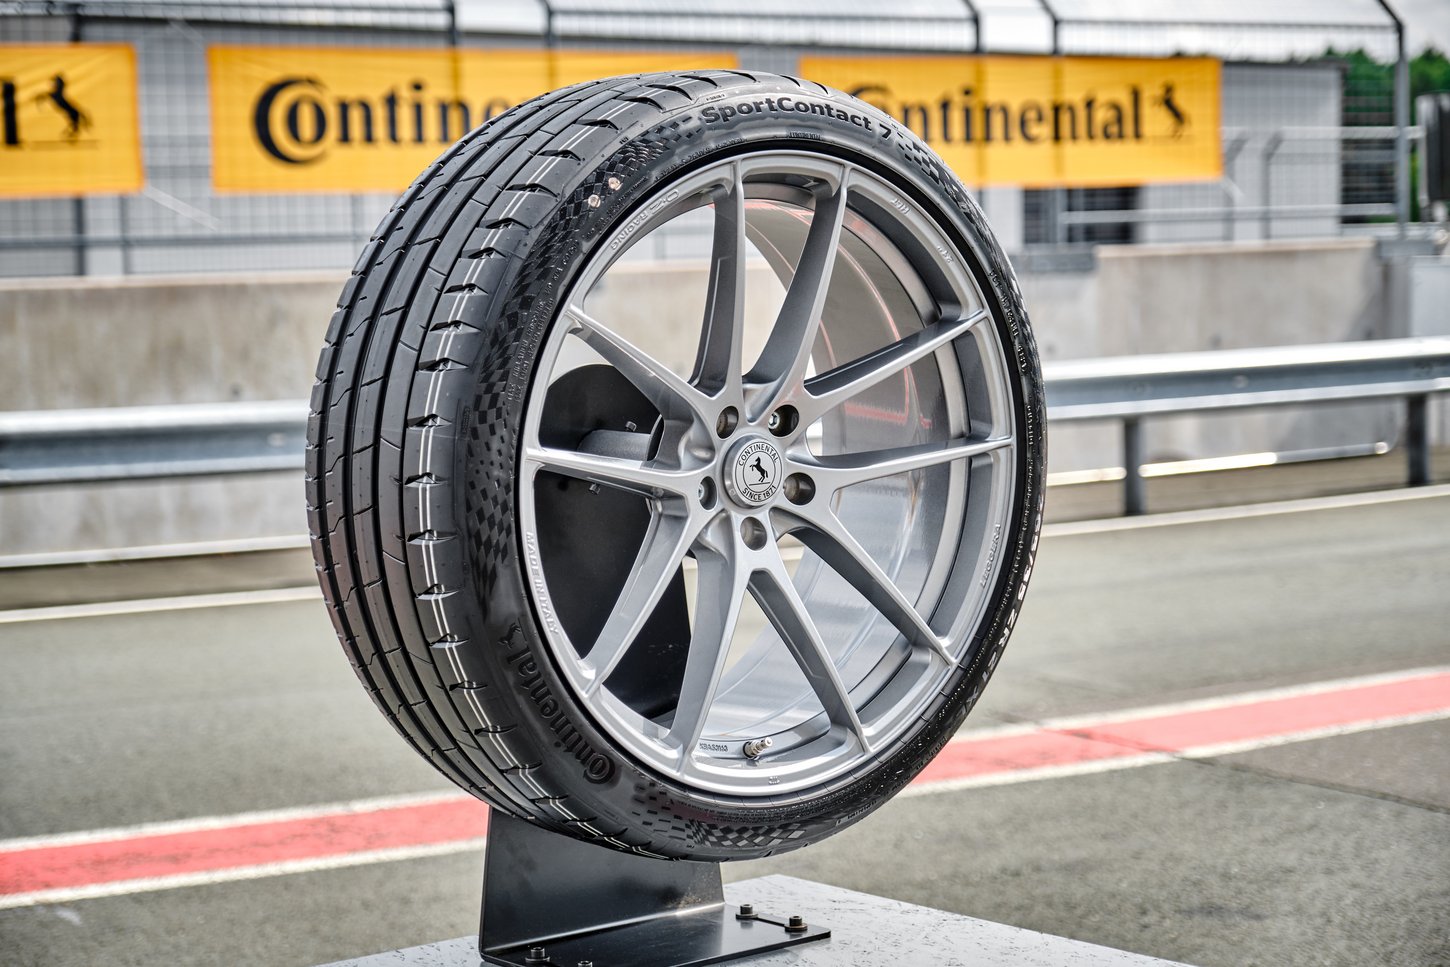 The new Continental SportContact 7 tire won its first test victory